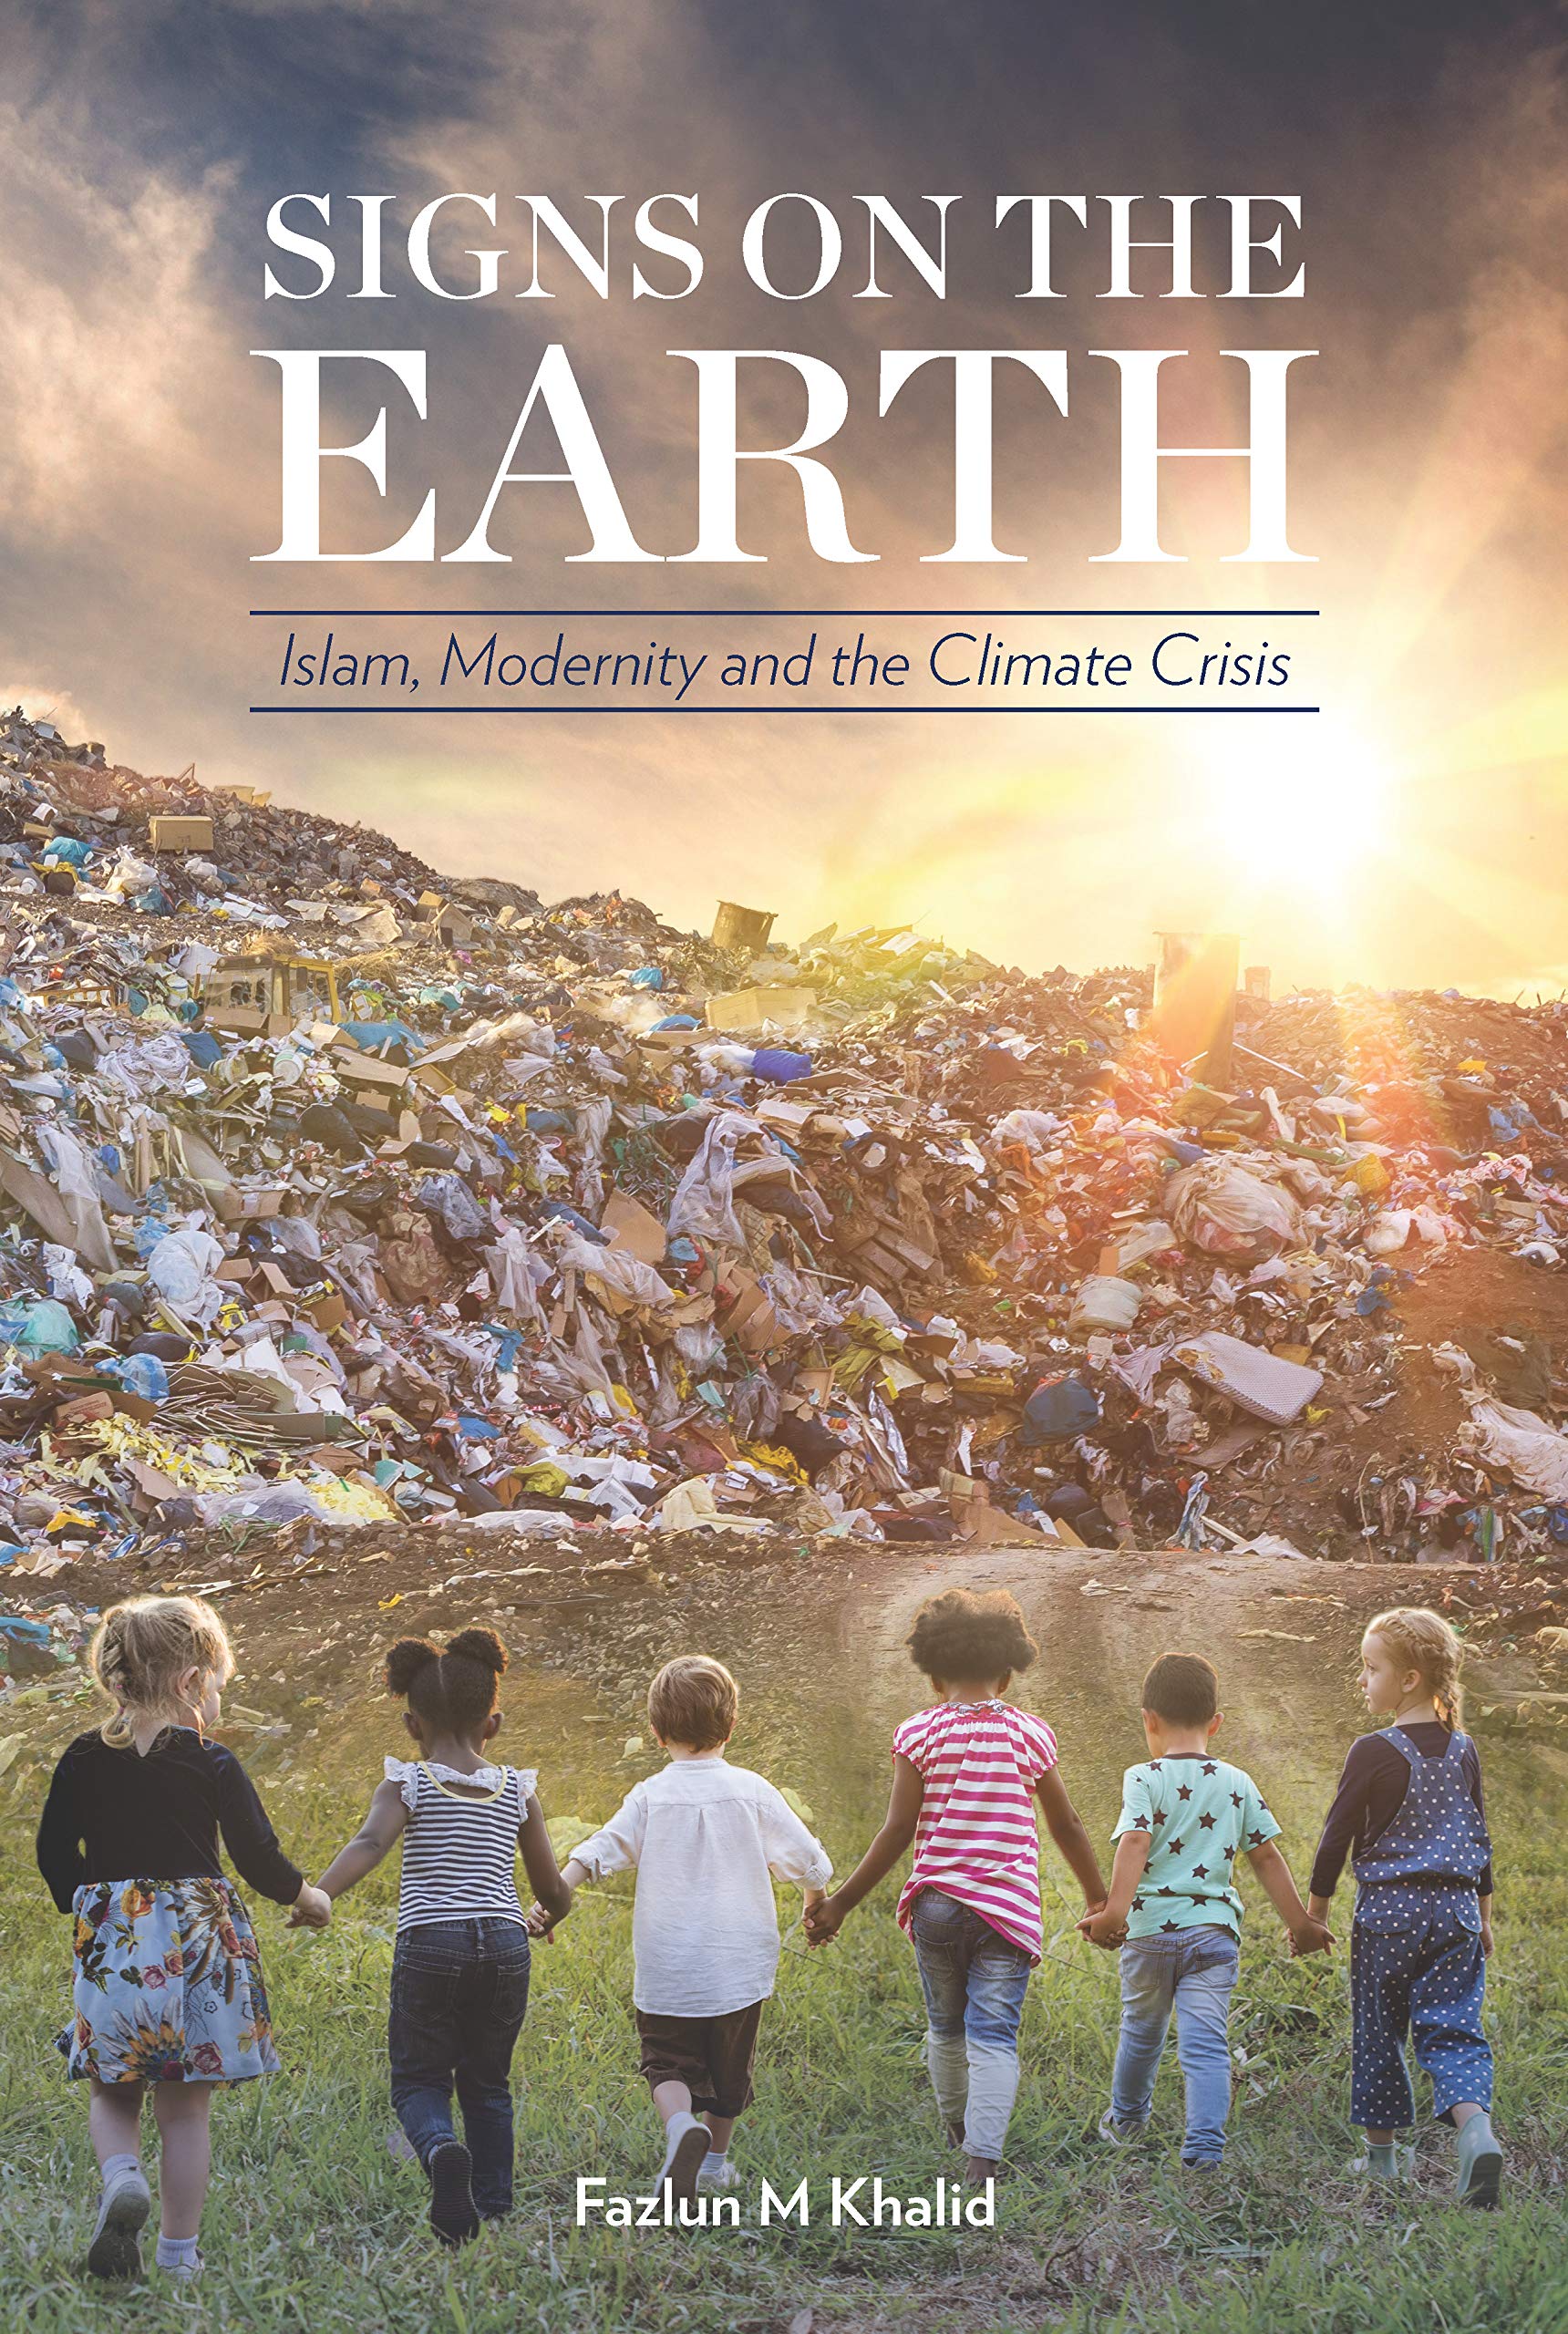 Signs on the Earth: Islam, Modernity and the Climate Crisis